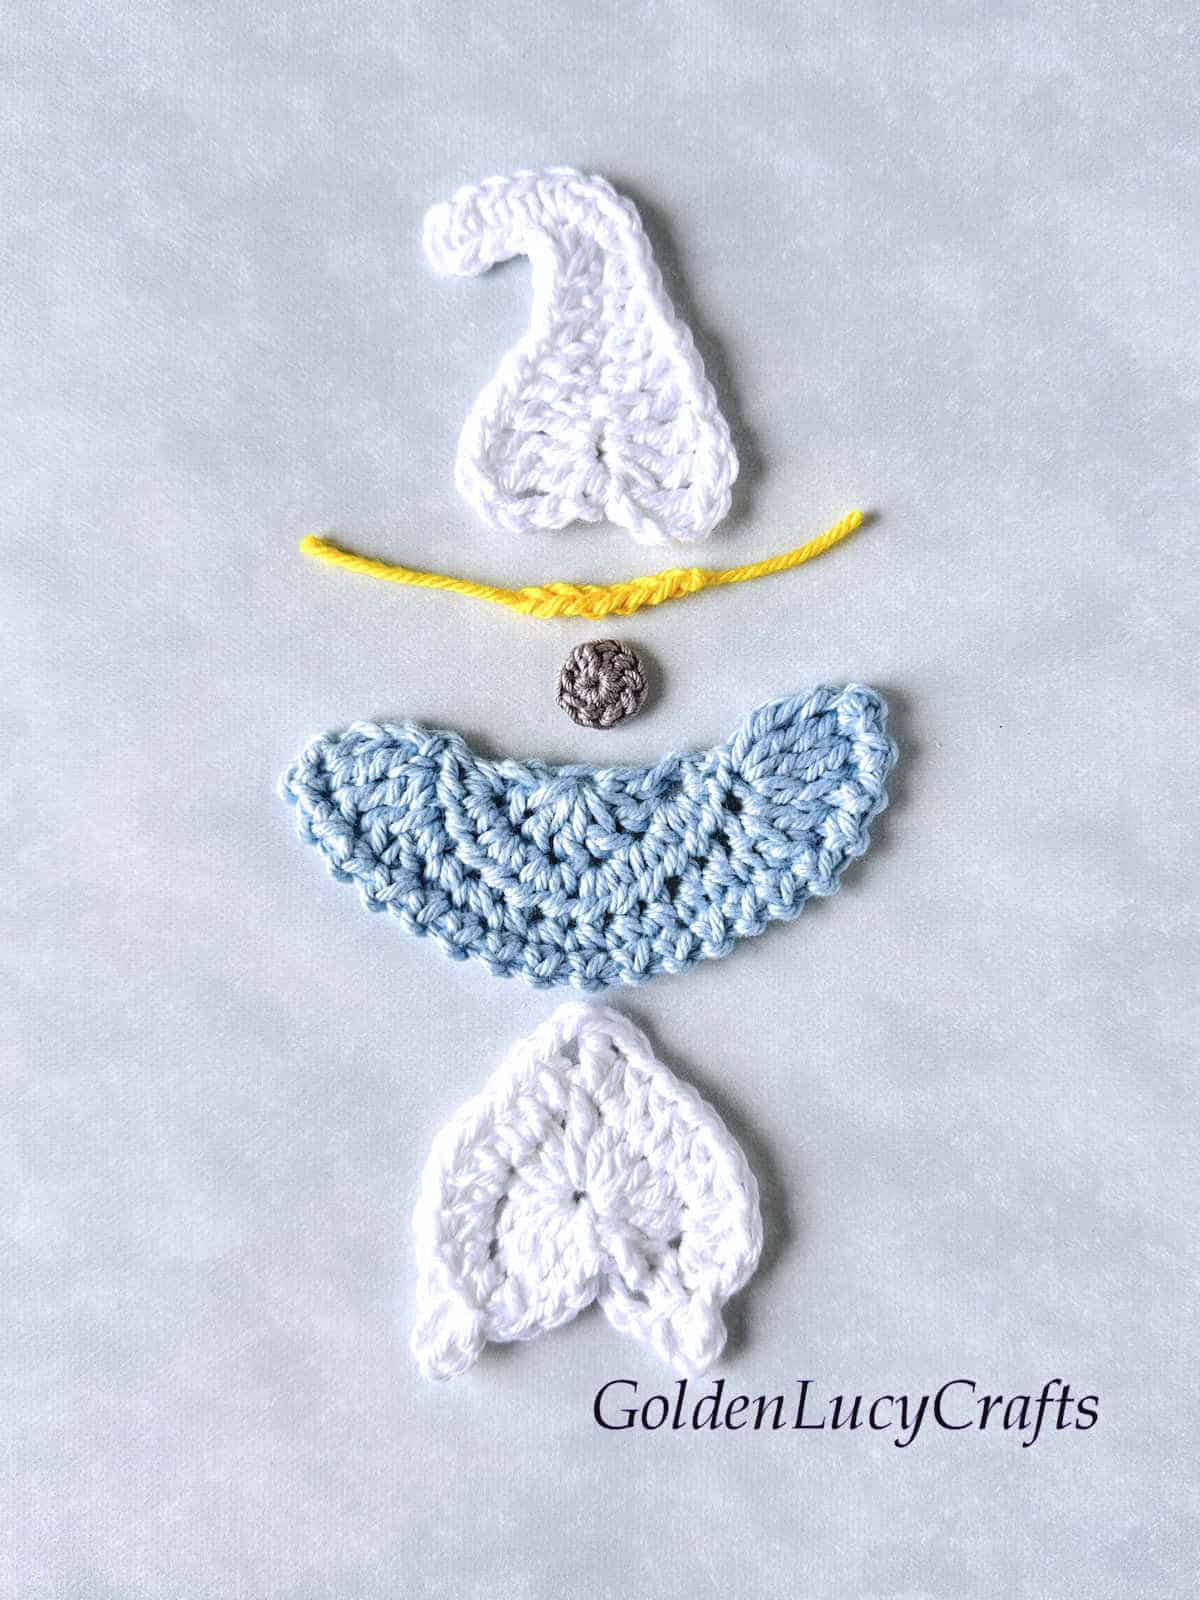 Parts of crocheted angel gnome.